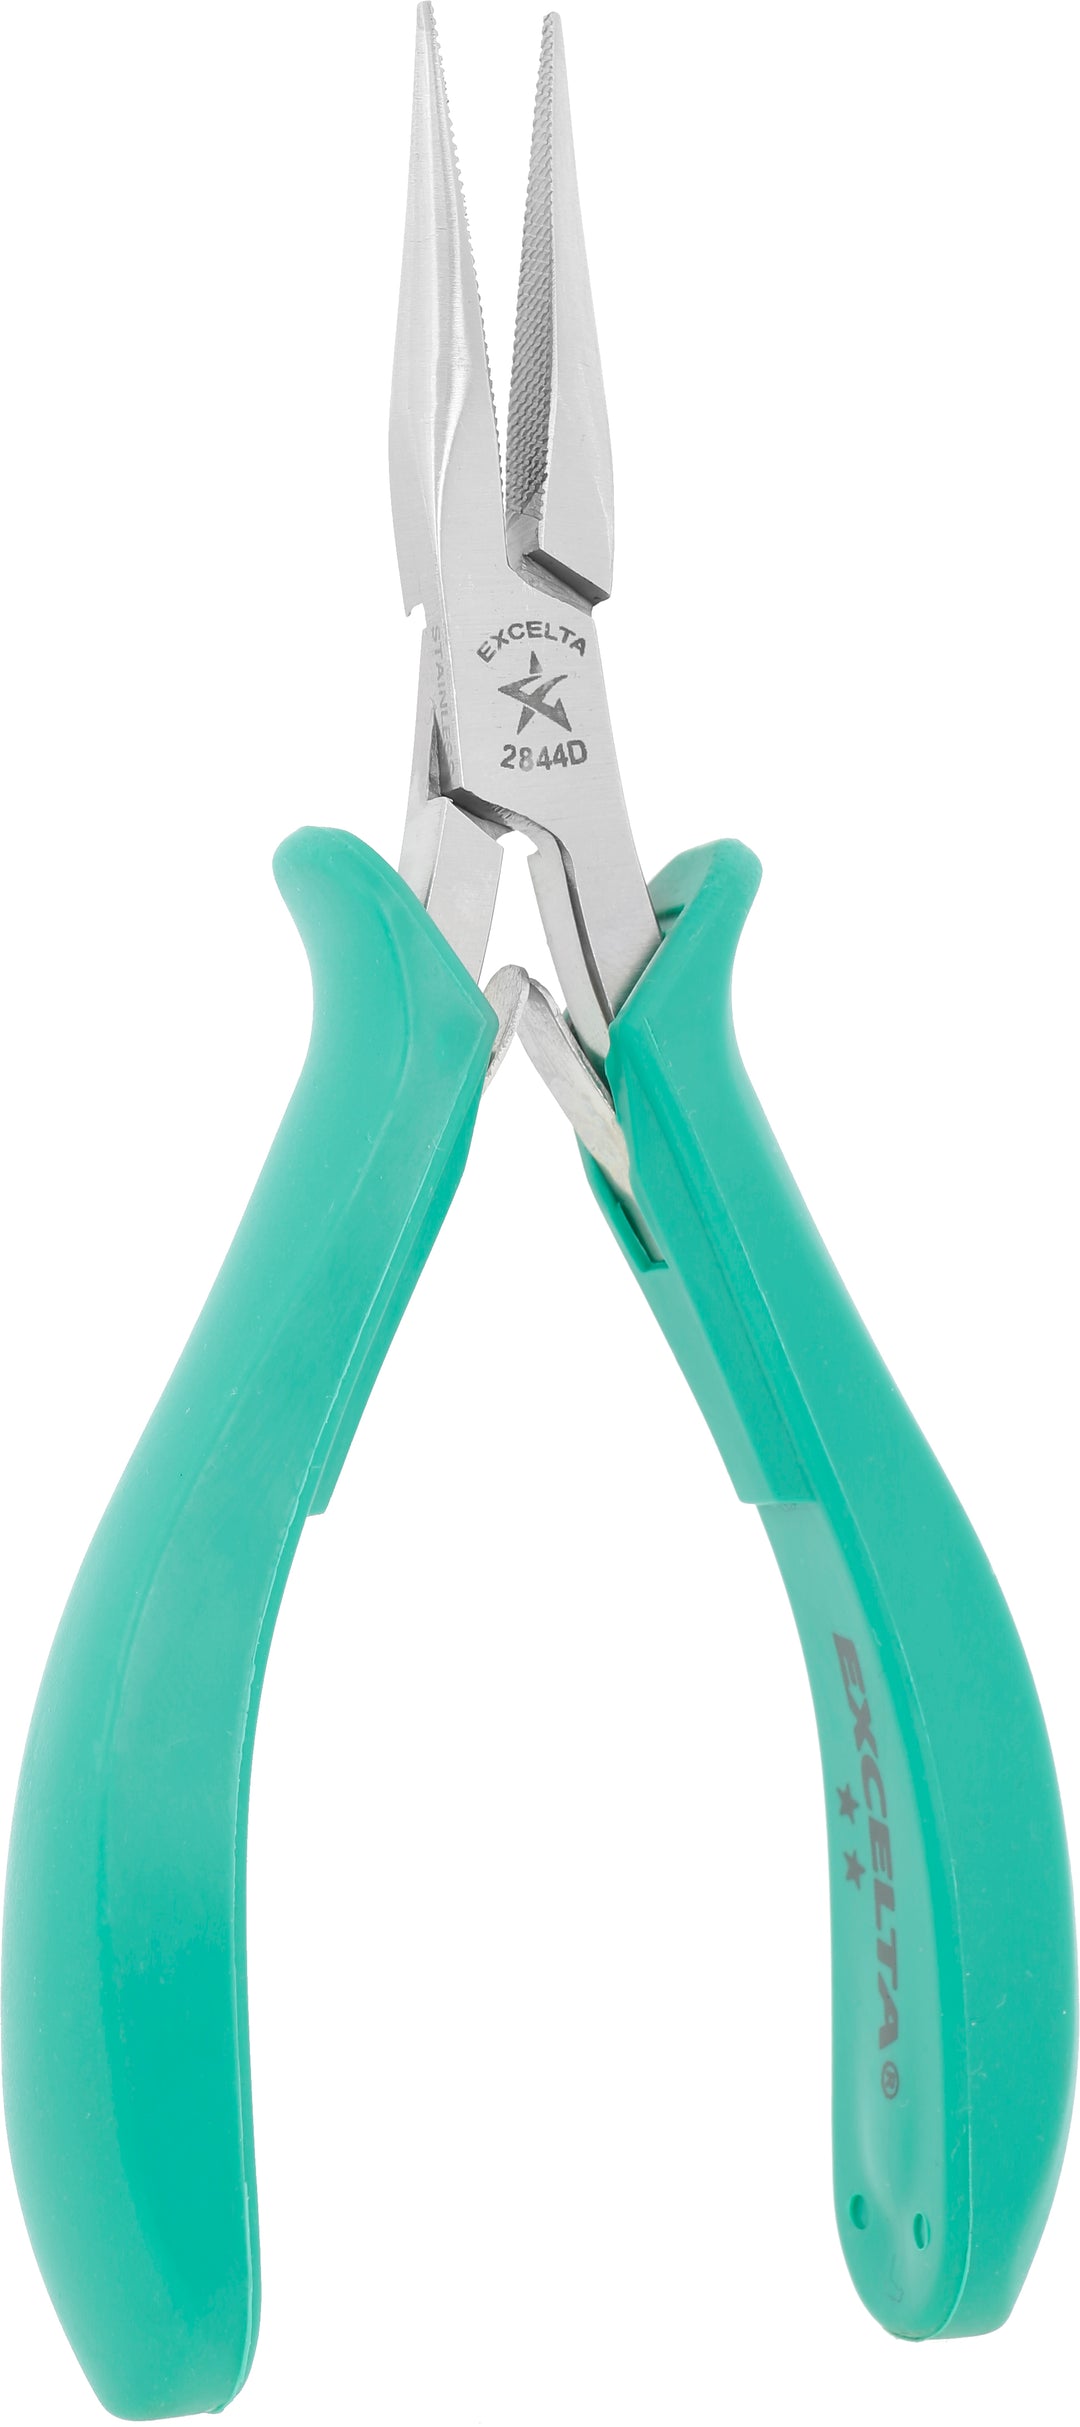 Excelta 2844D Pliers - 2 Star Medium Chain Nose - SS - Serrated Jaws